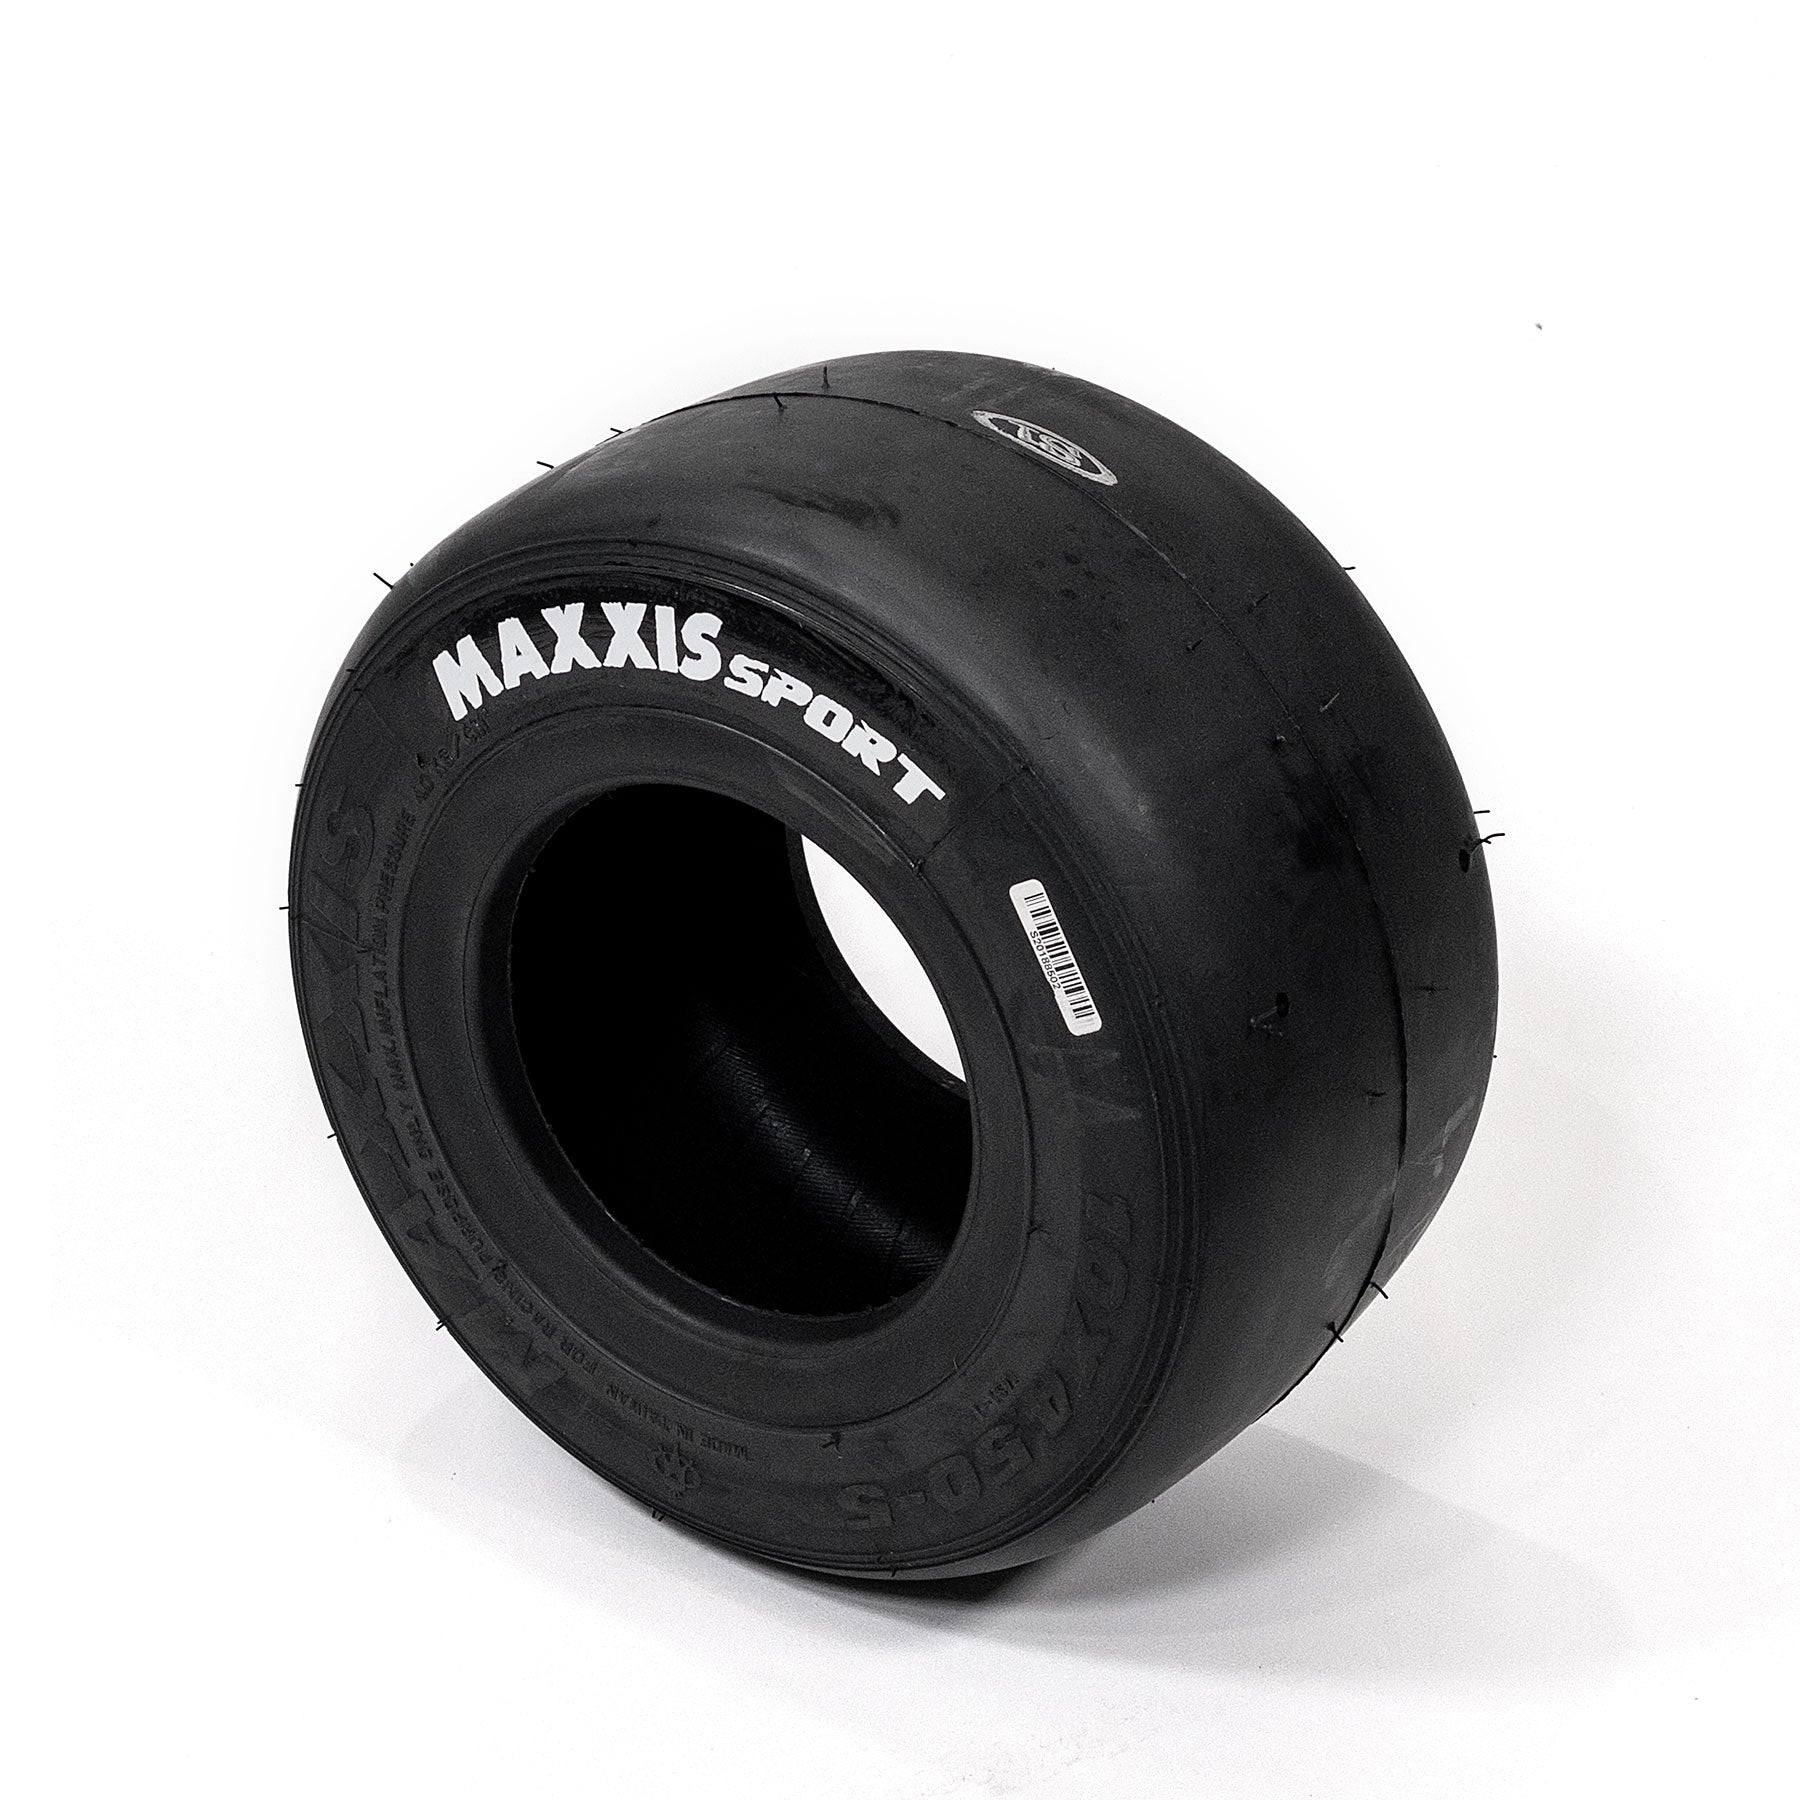 Maxxis Sport front kart tyre for use in KNSW racing